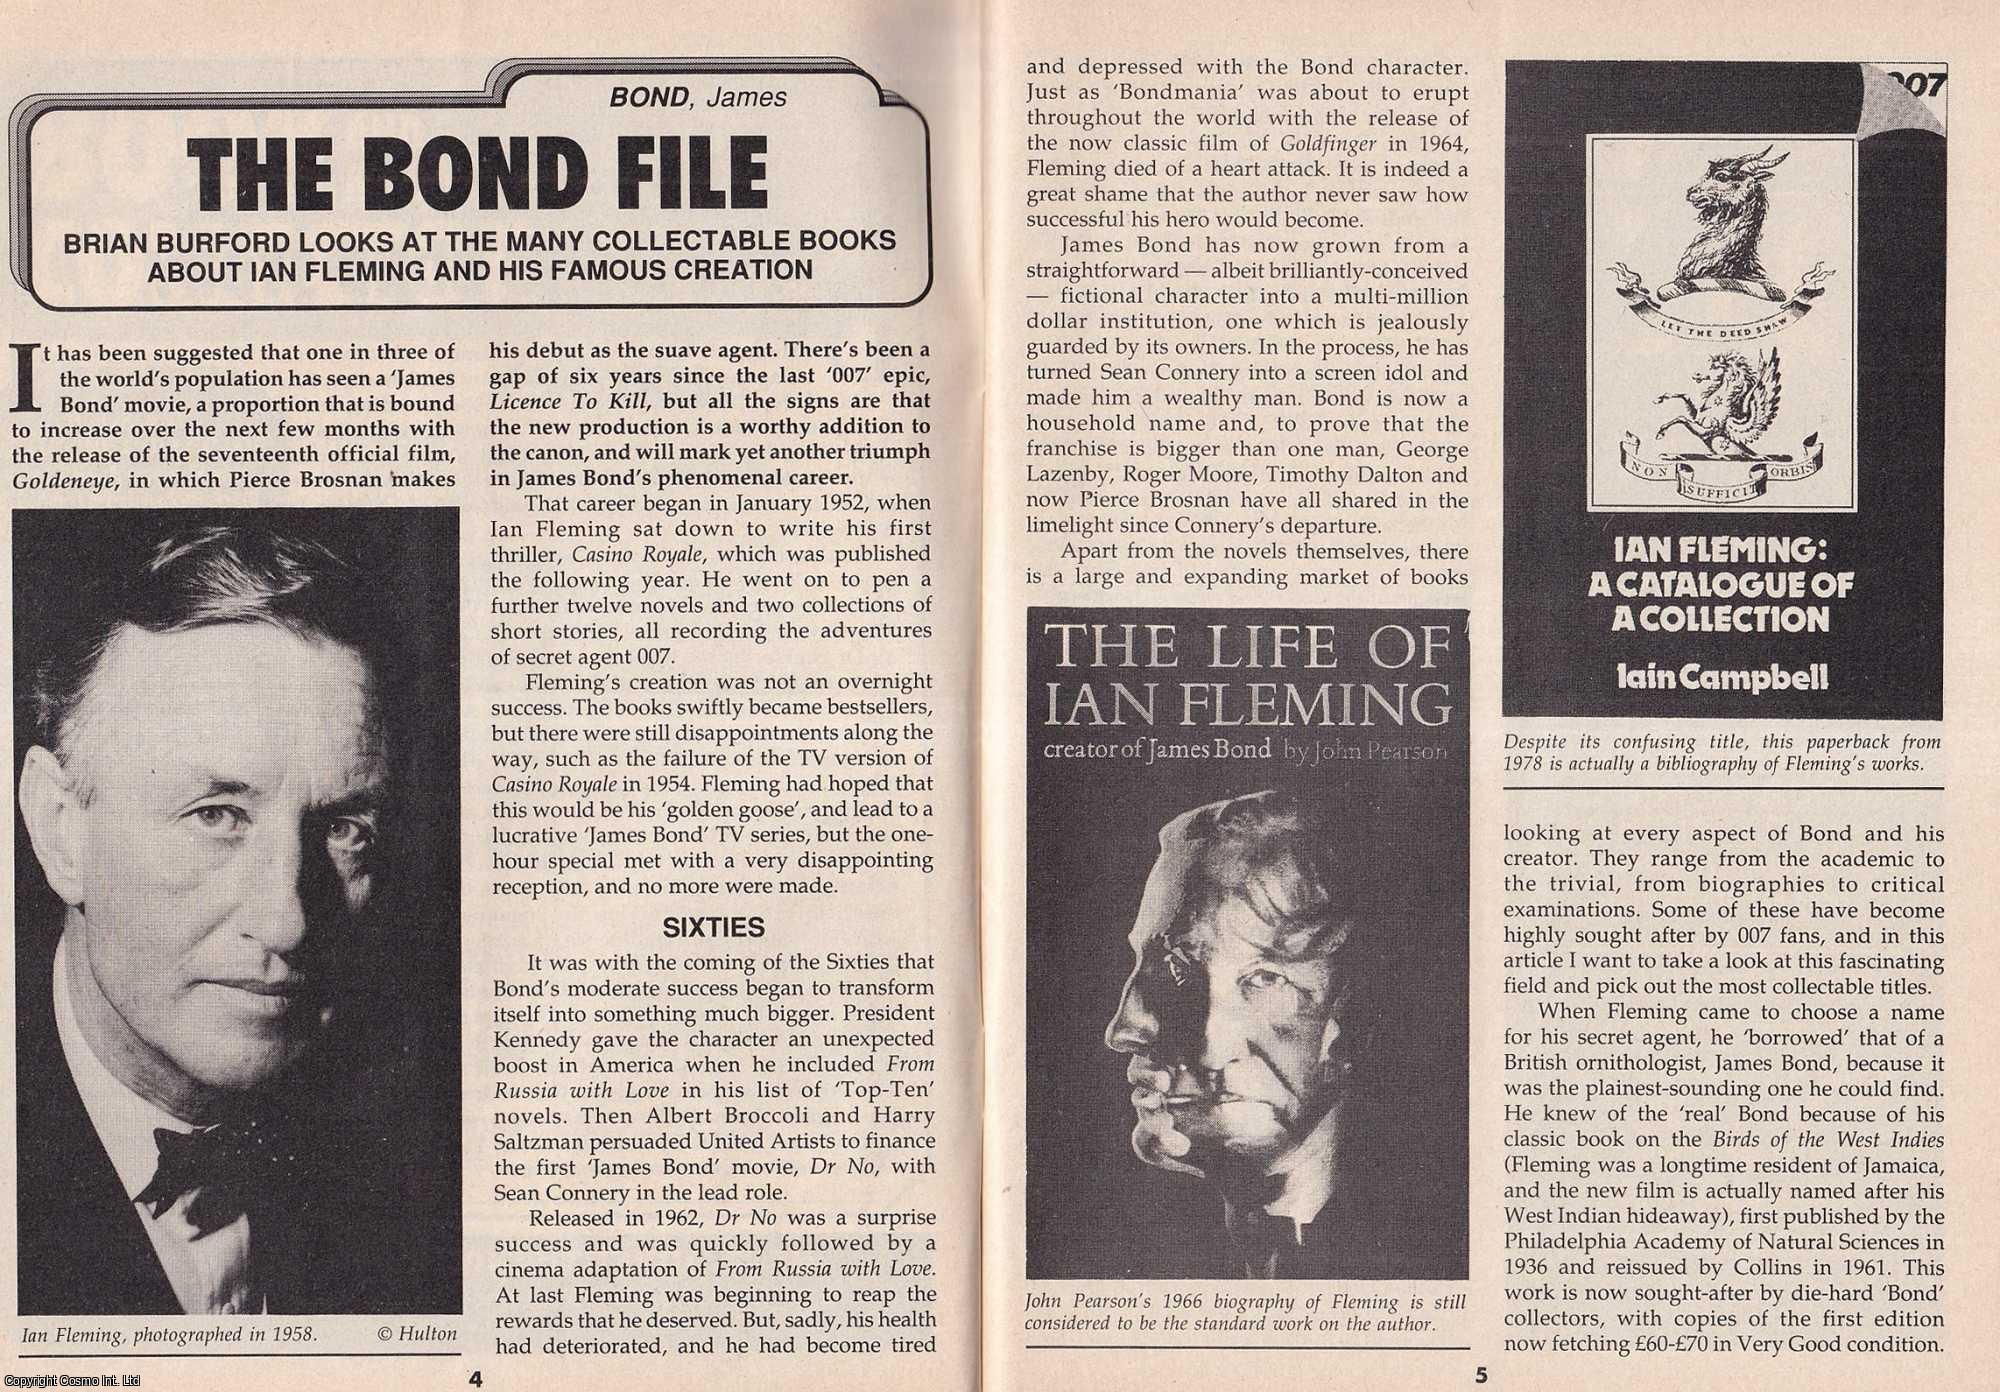 Brian Burford - The James Bond File. This is an original article separated from an issue of The Book & Magazine Collector publication.